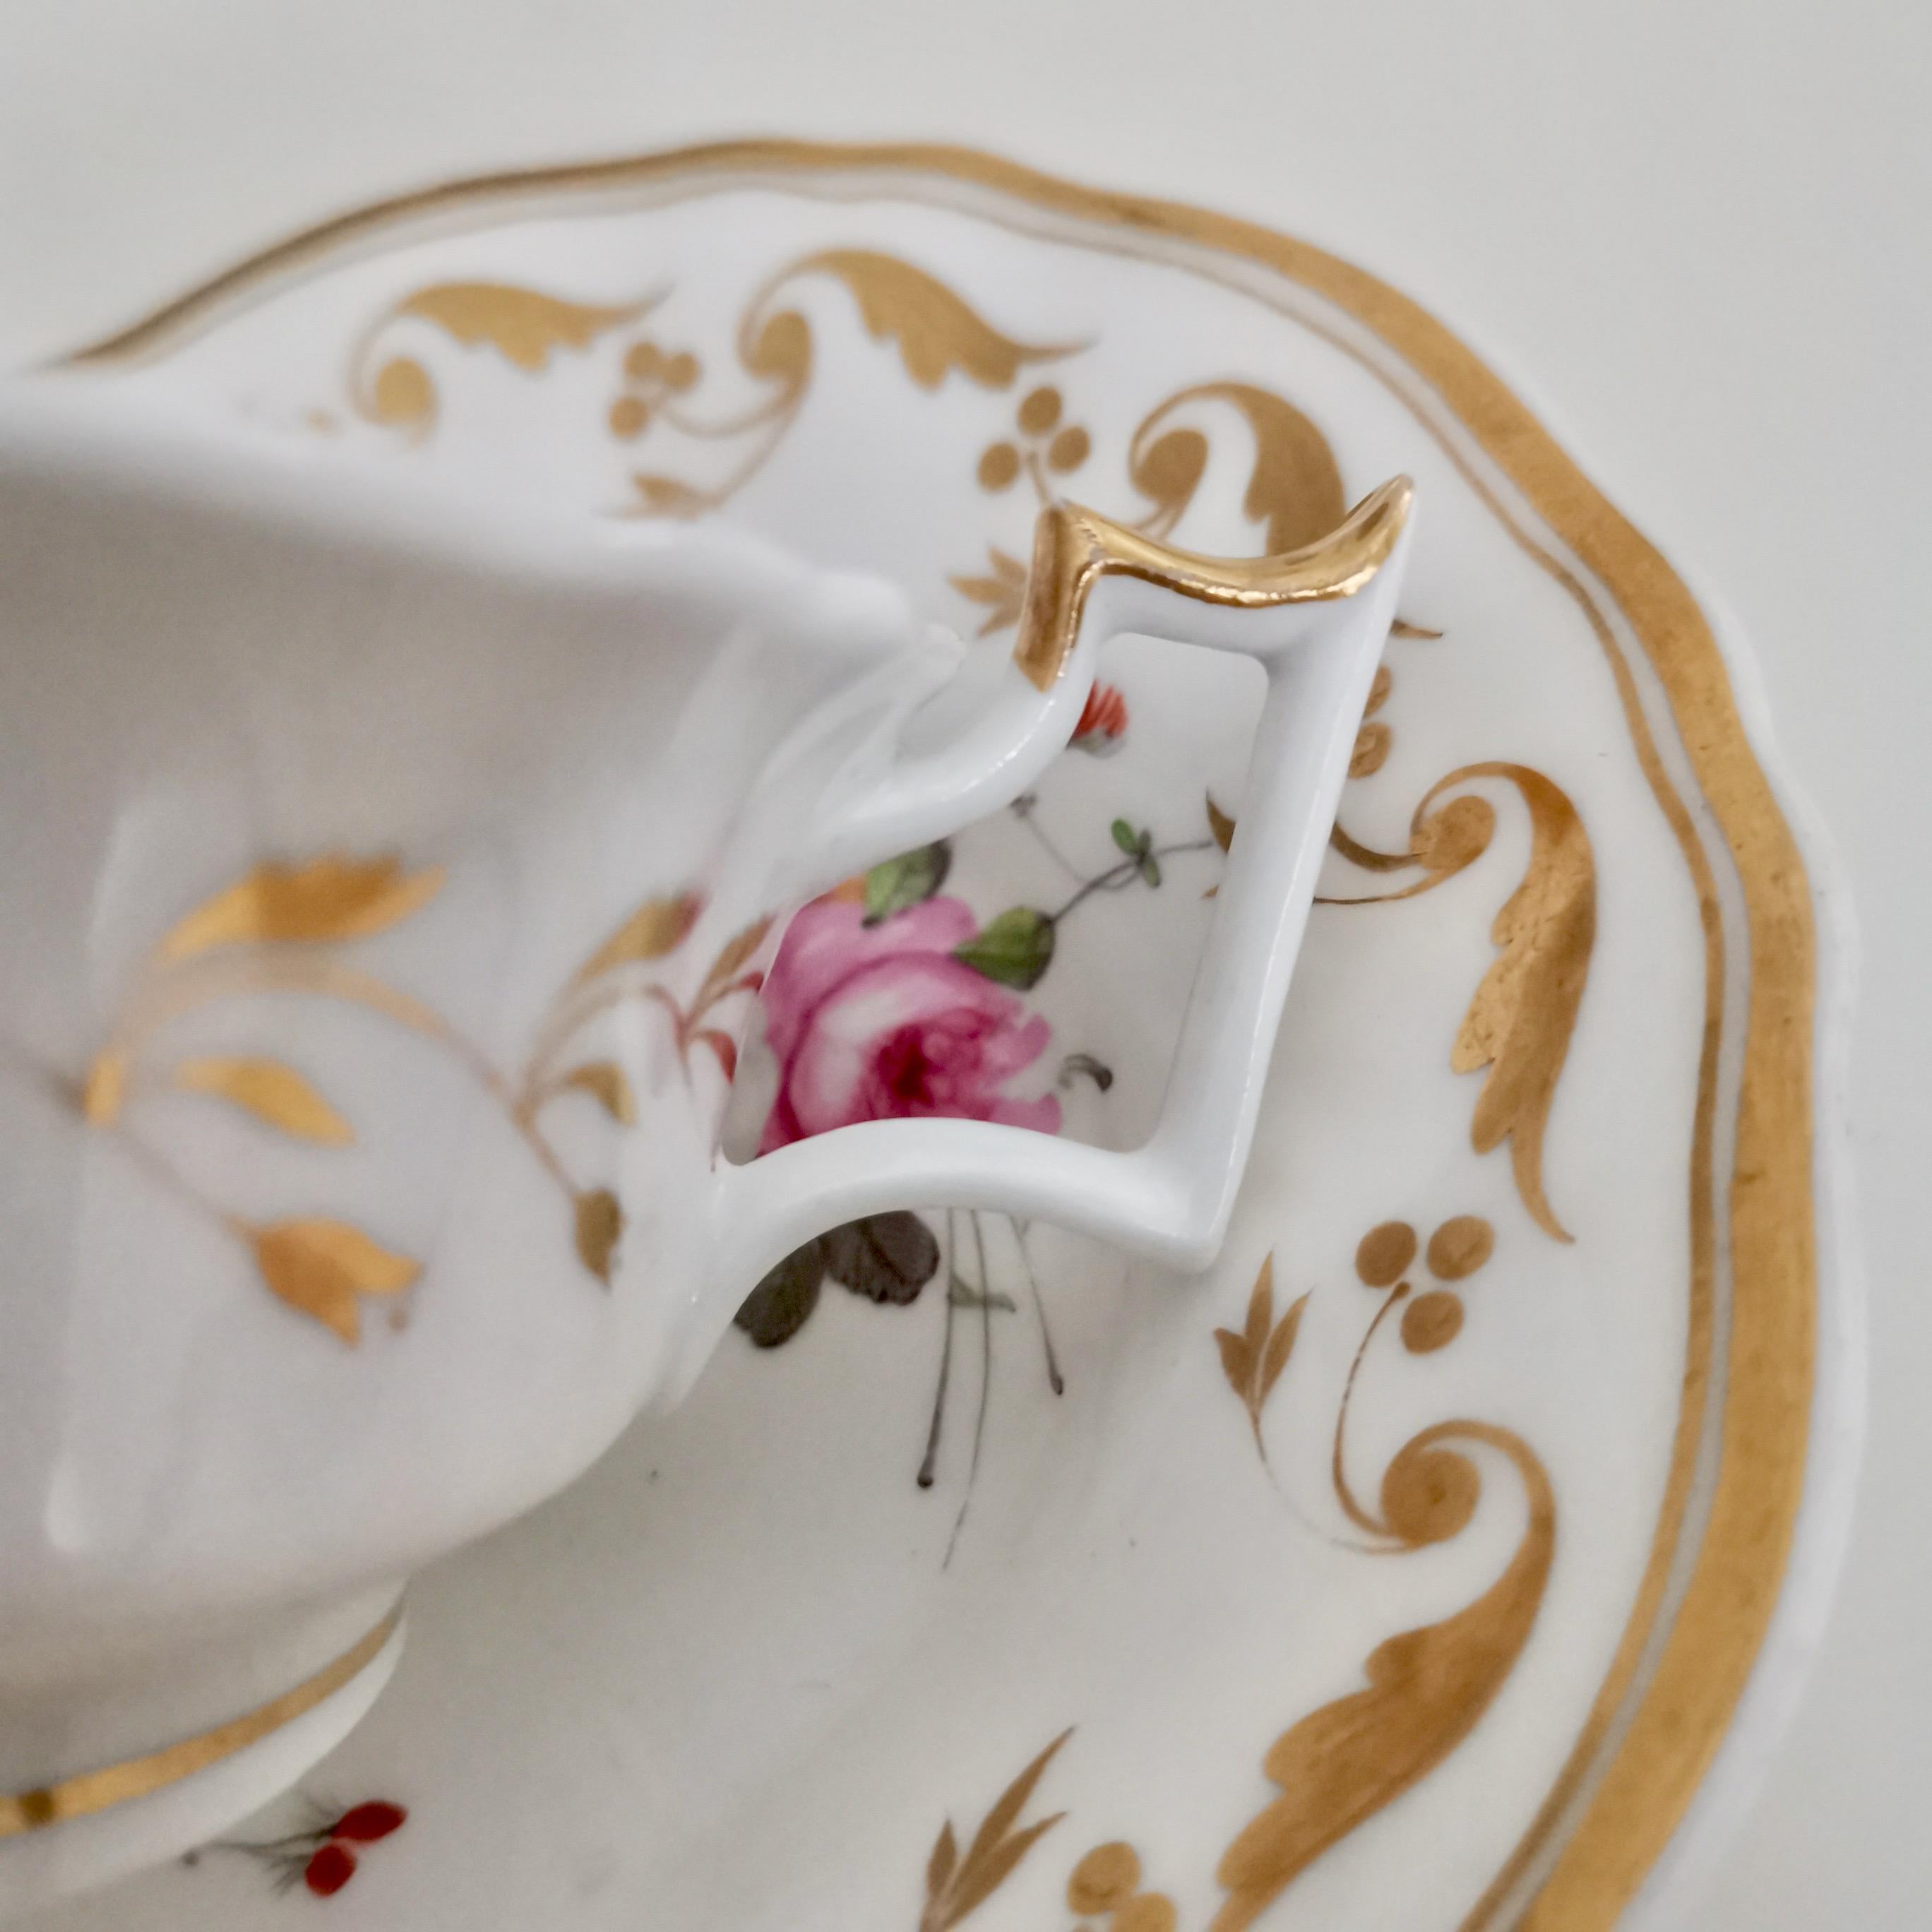 Yates Porcelain Teacup, White with Gilt and Flowers, Regency, circa 1825 7